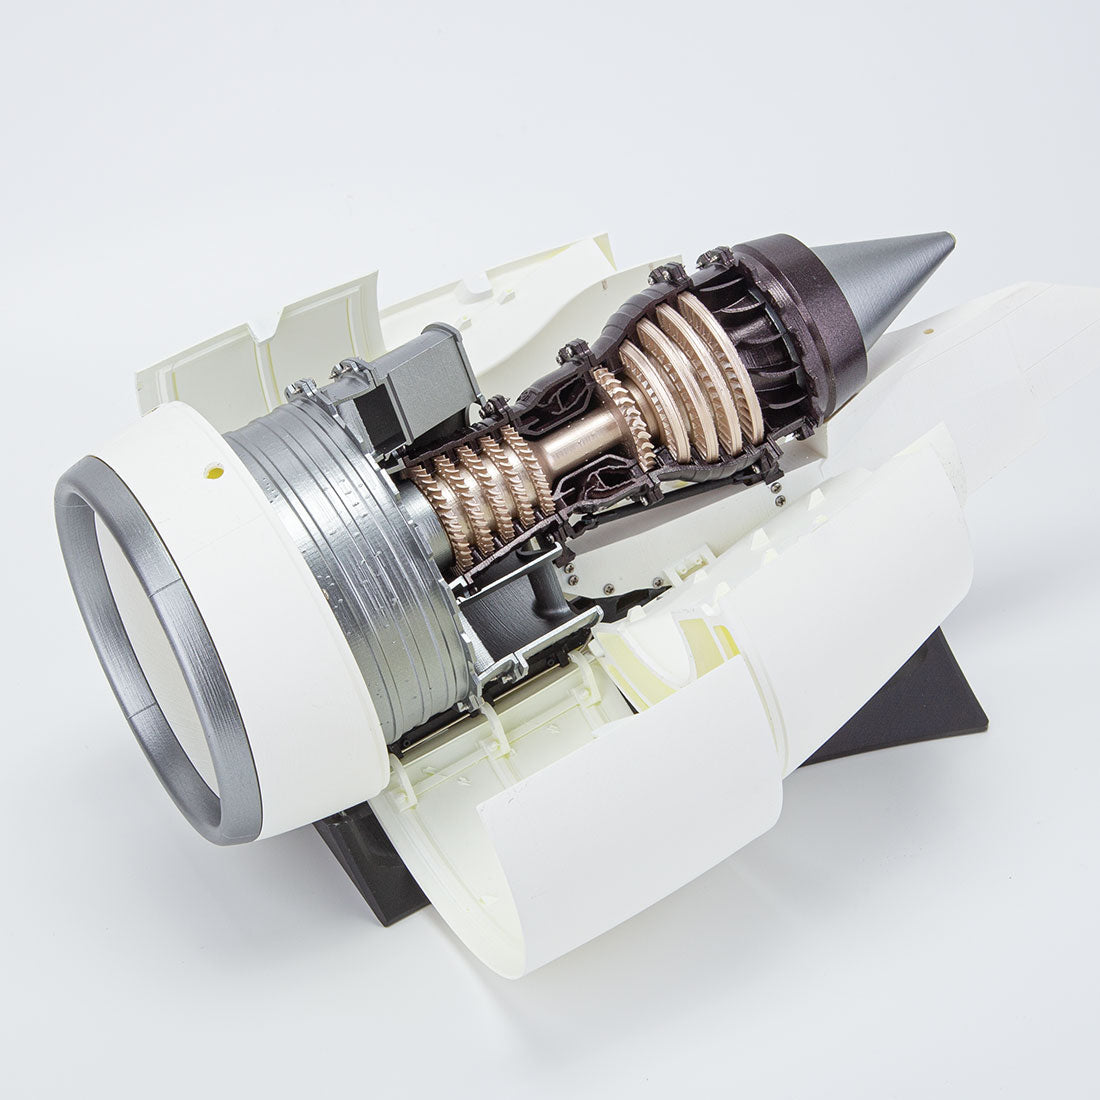 3D Printed Aircraft Turbofan Engine Assembly Model 1/30 Scale NTR-900